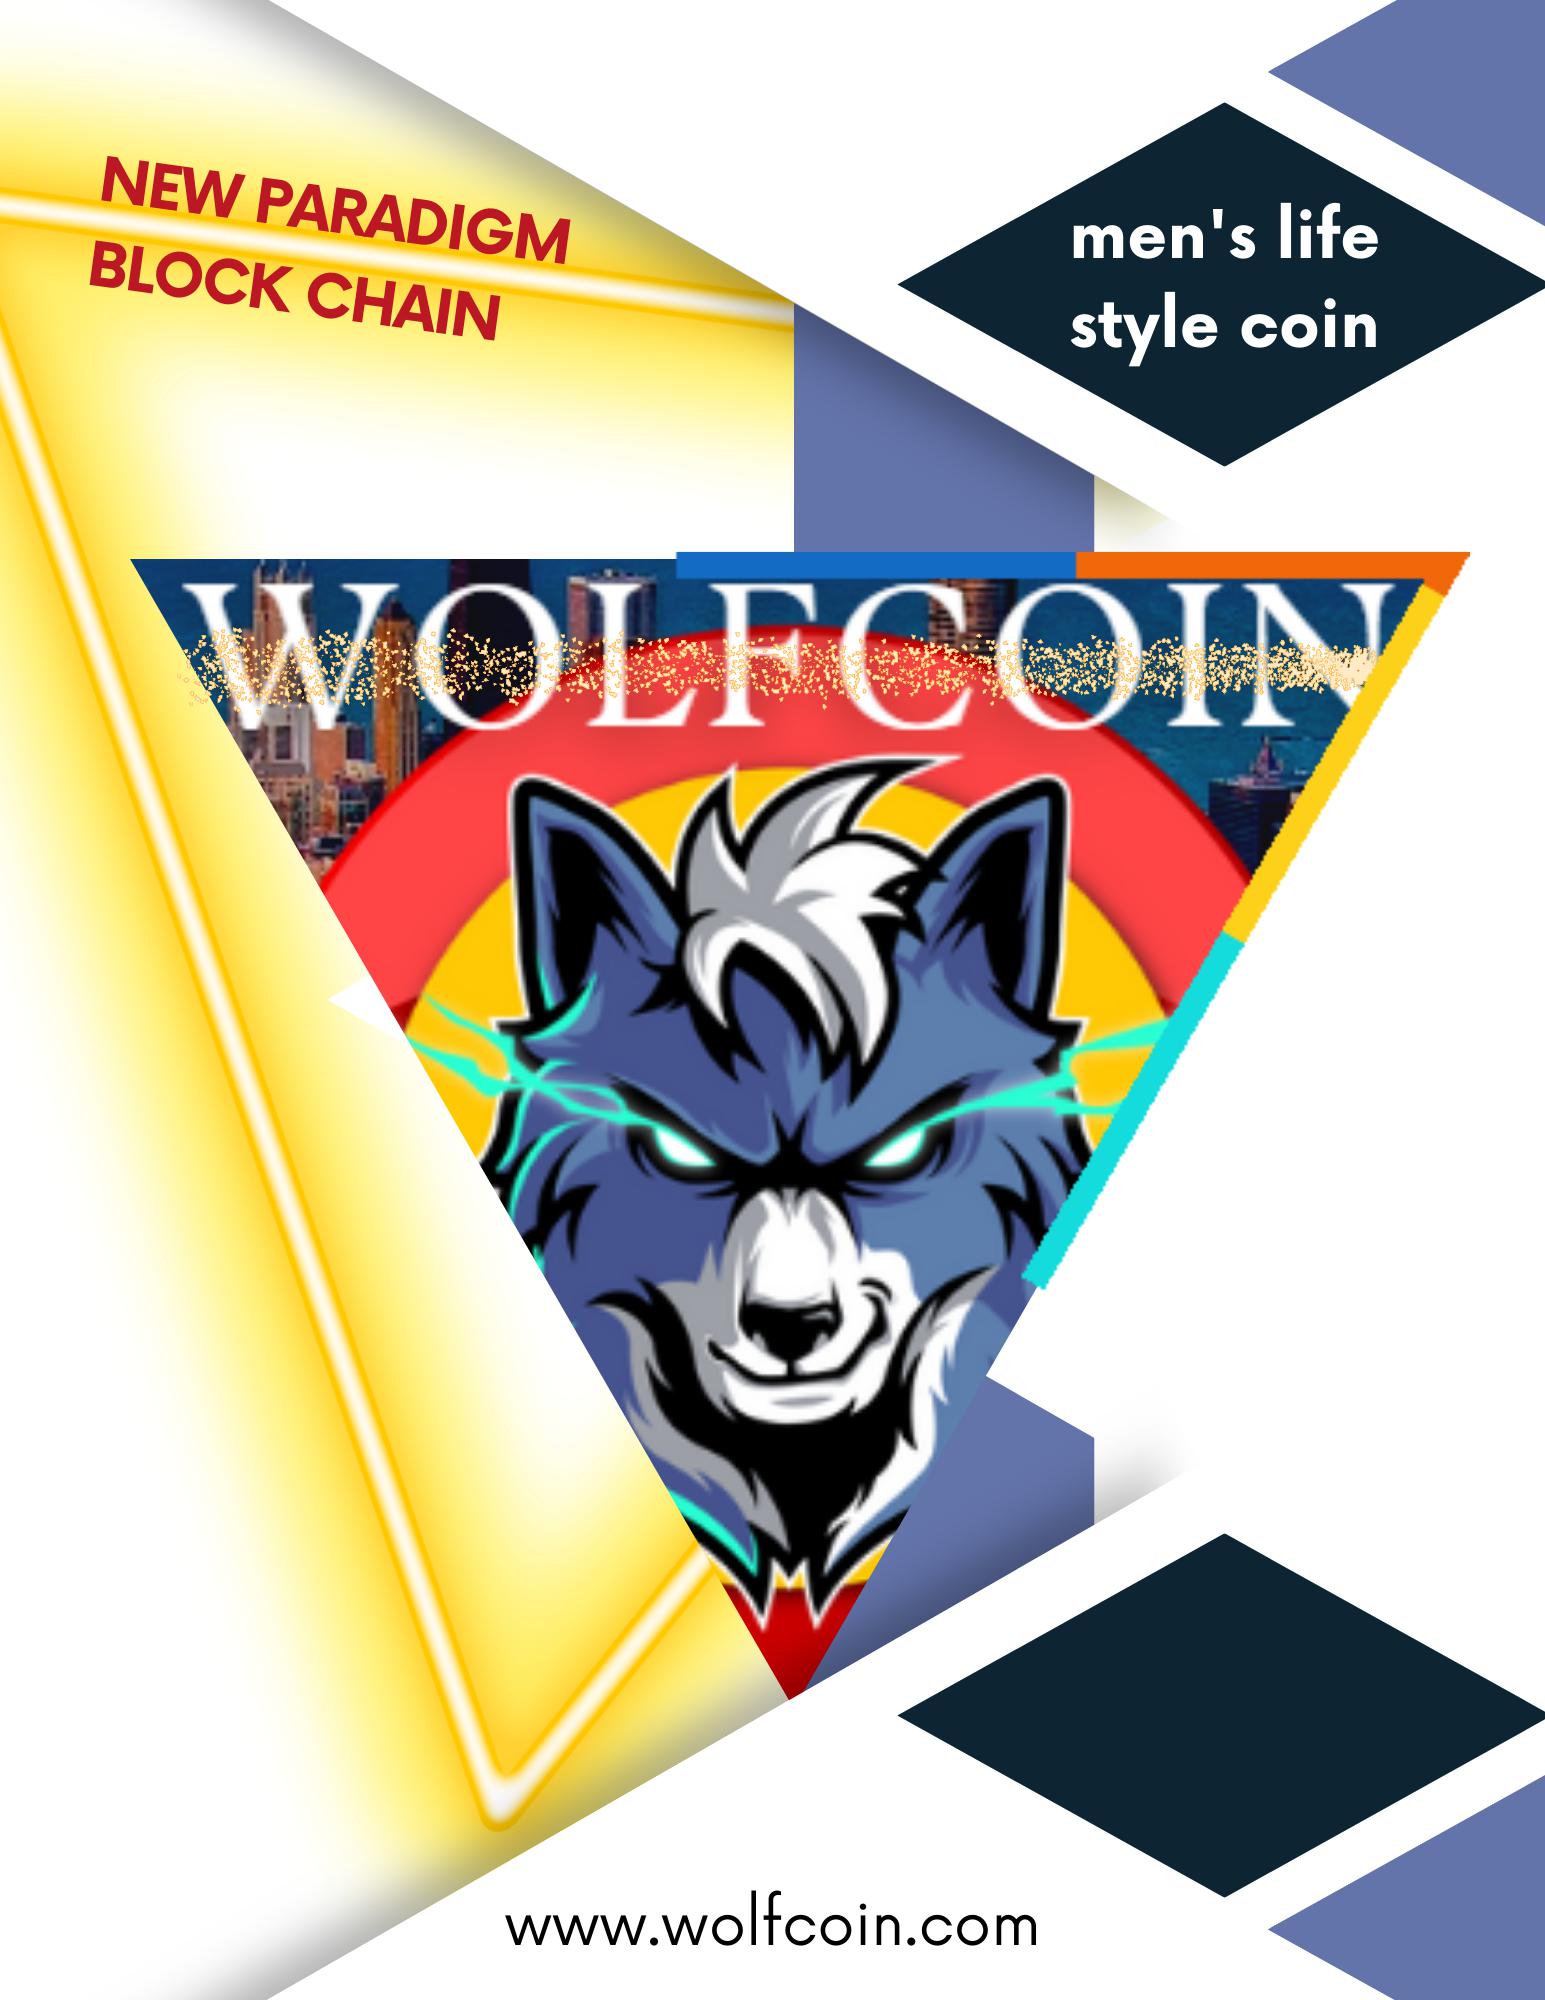 men',s life style coin(wolfcoin).png.jpg